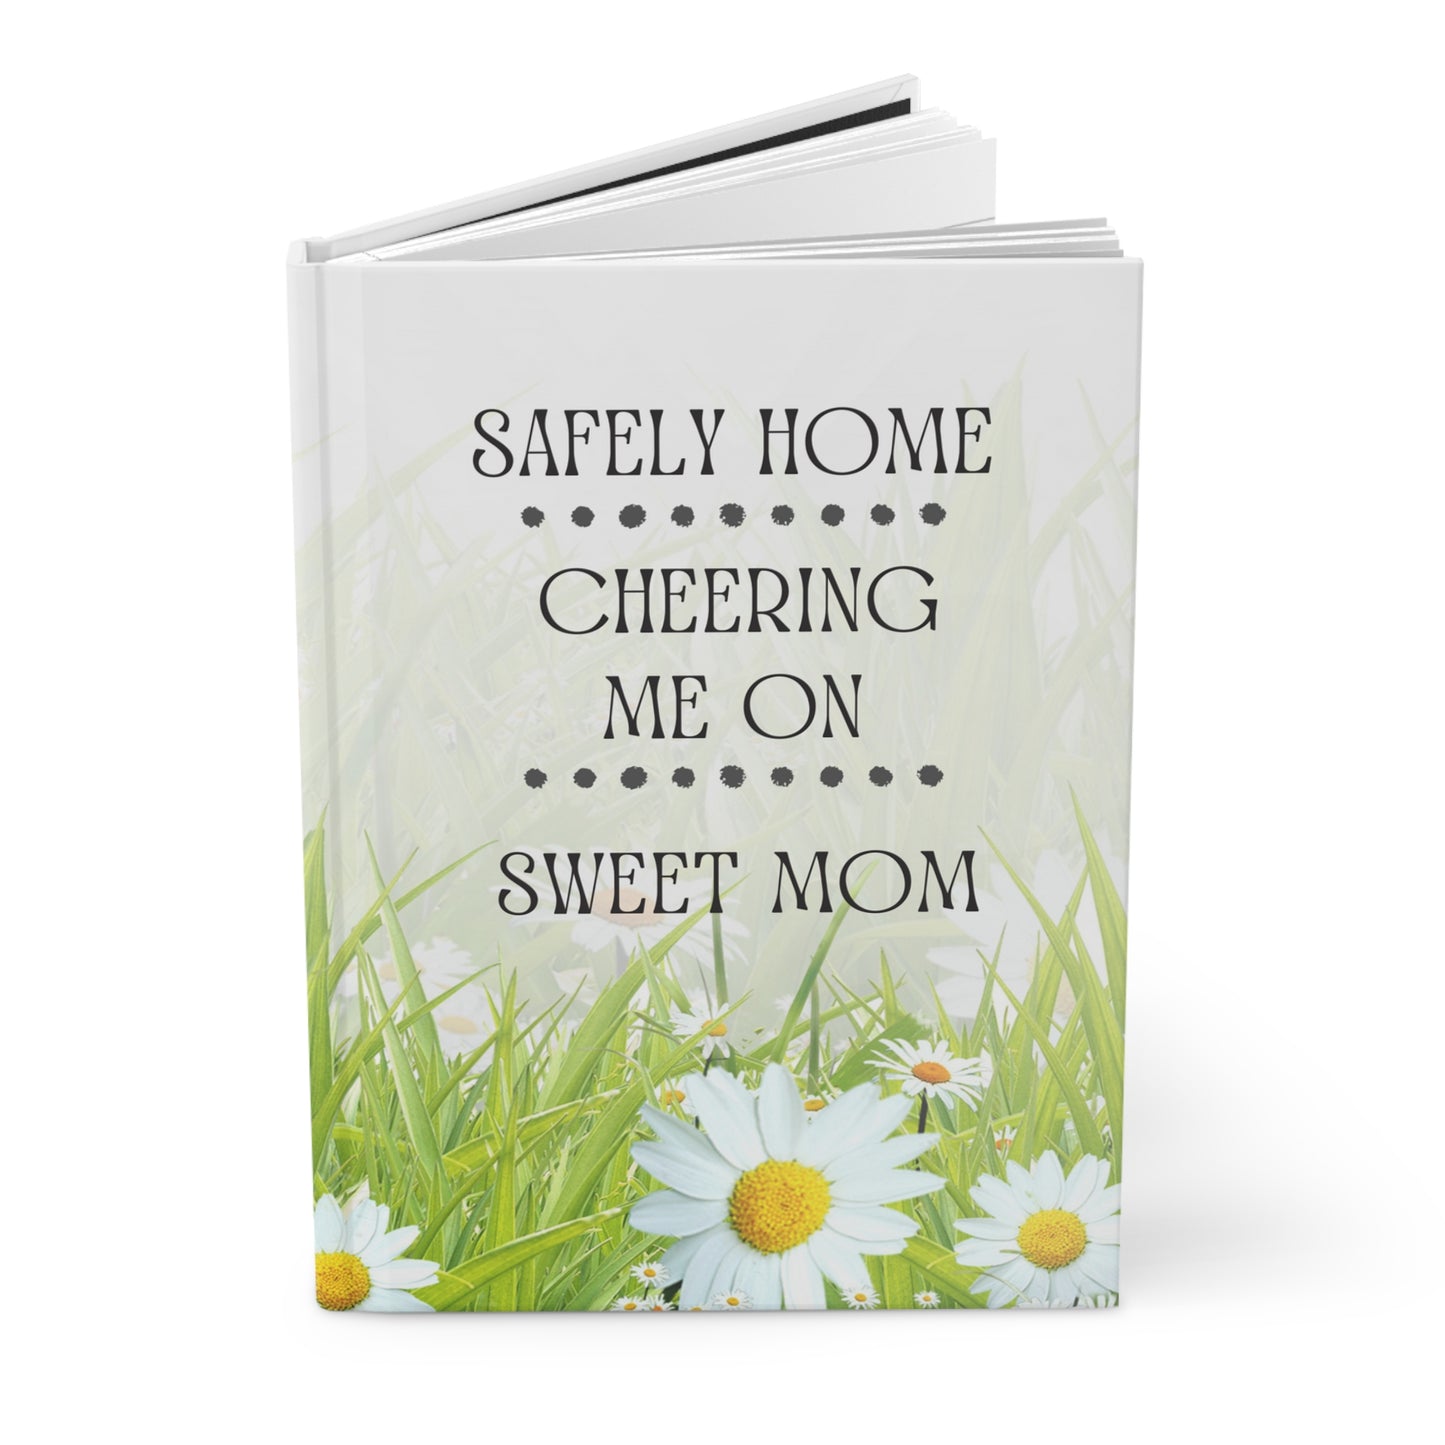 Grief Journal for Loss of Mom, Safely Home Cheering Me On